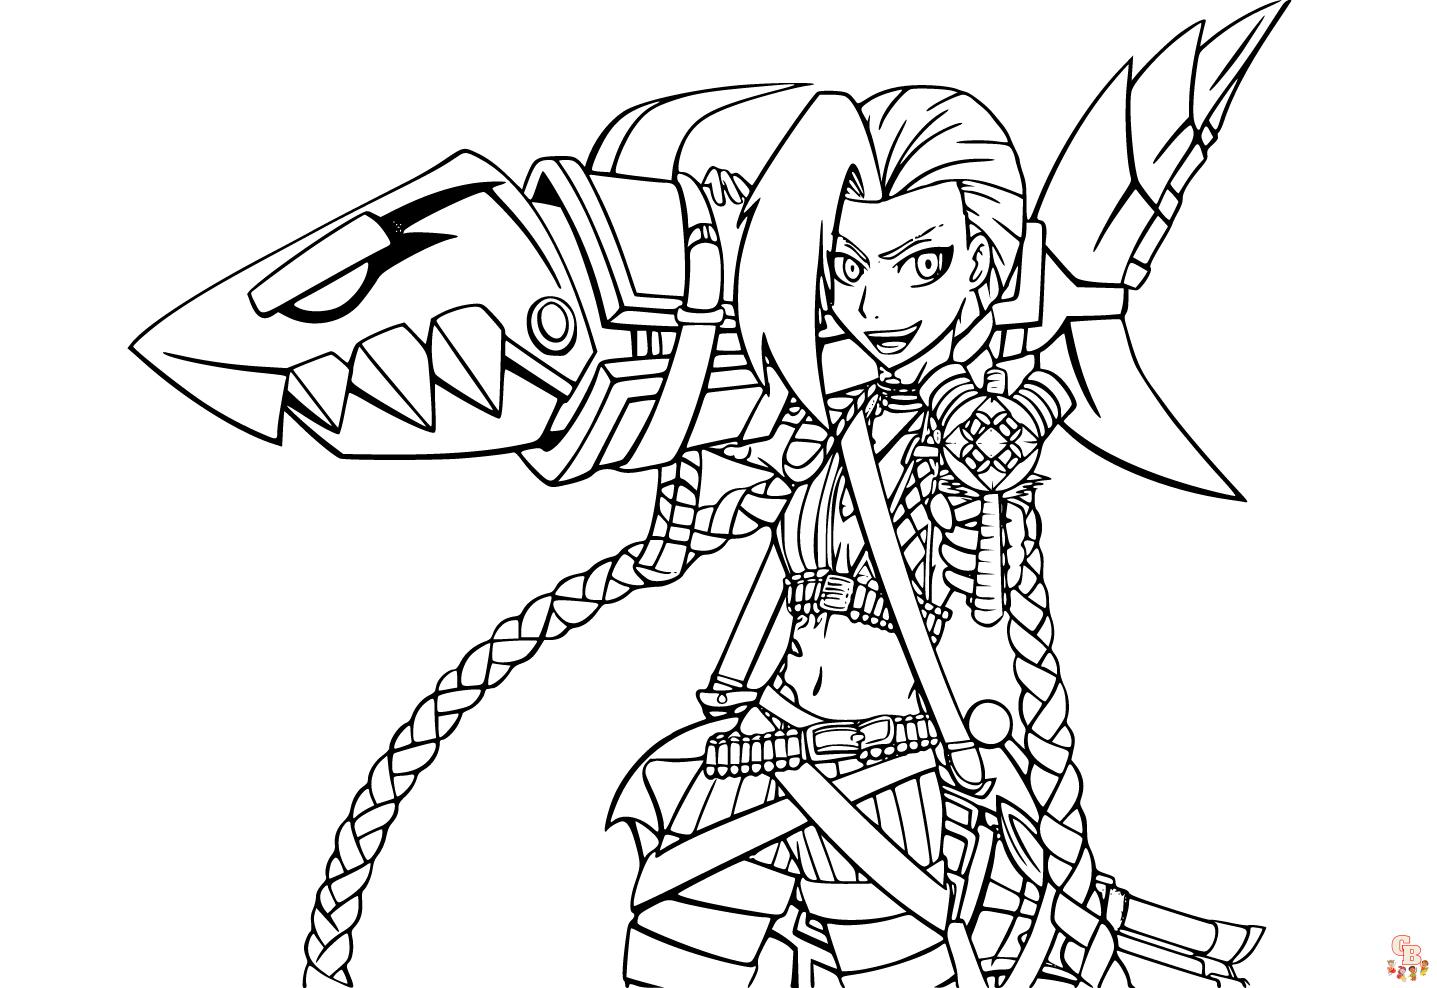 League of Legends coloring pages printable